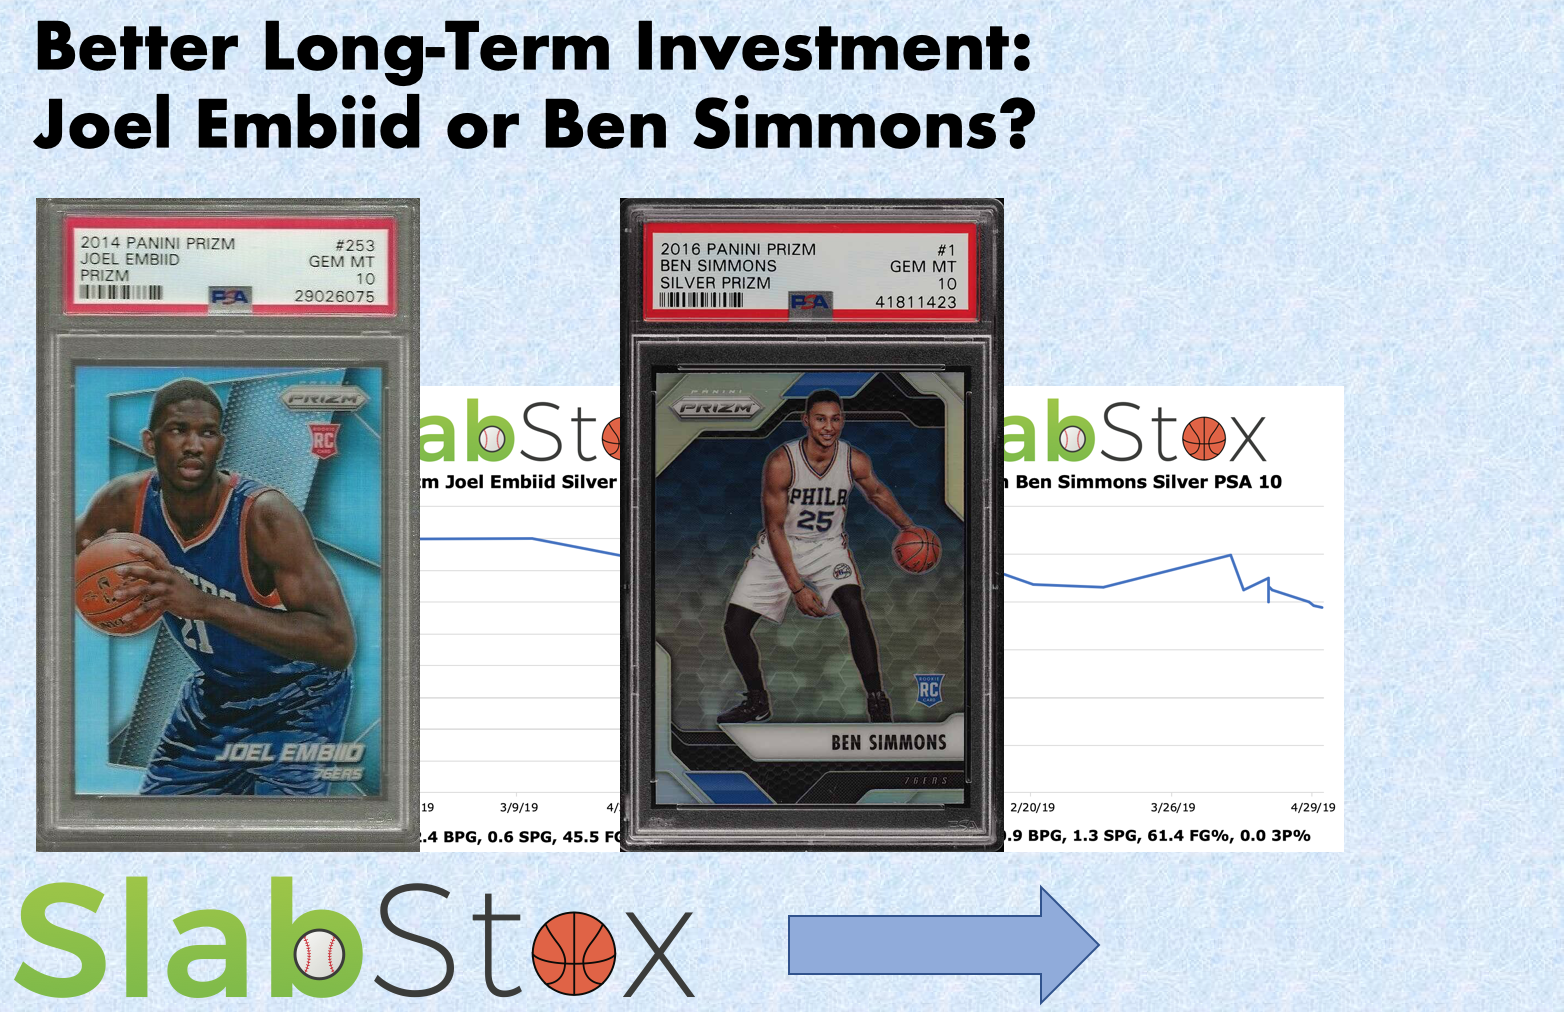 Graphic image that says "Better Long-Term Investment: Joel Embiid or Ben Simmons?" with SlabStox logo underneath